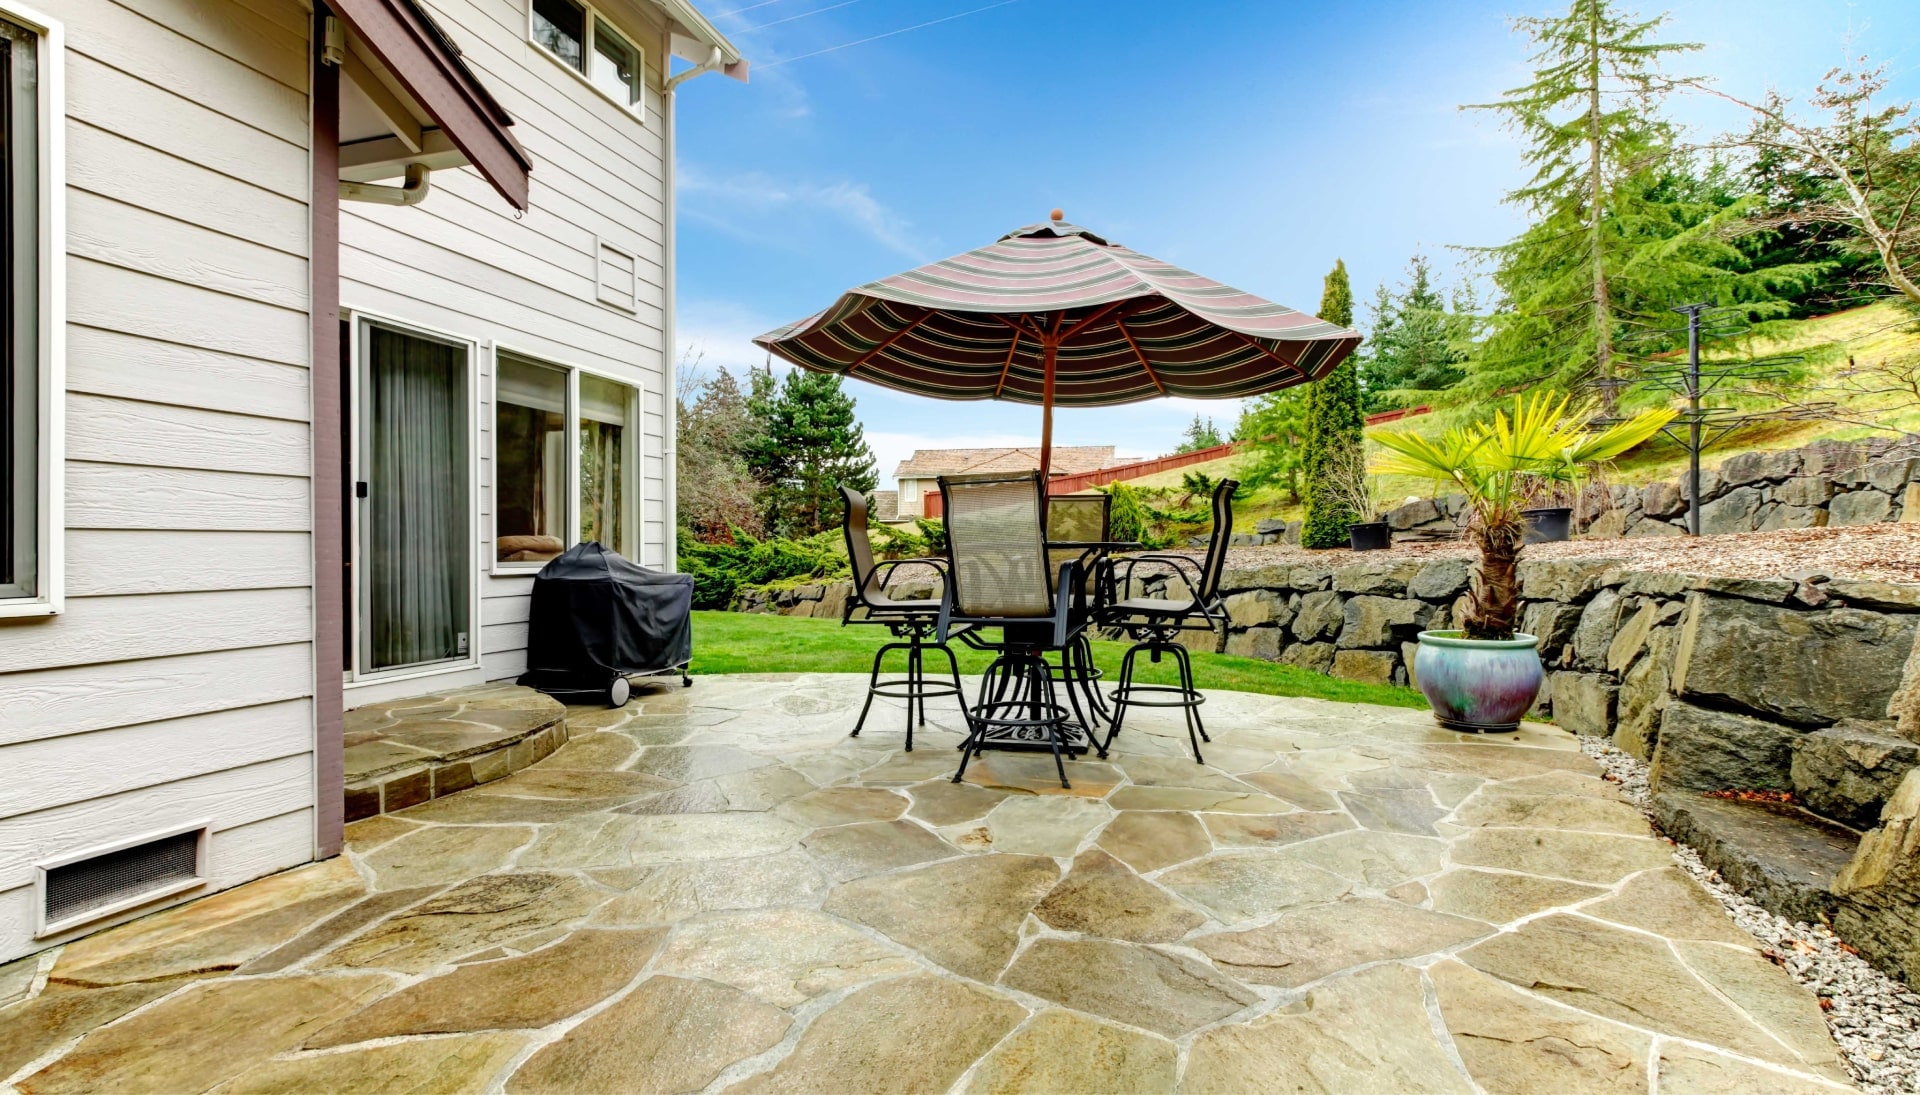 Create an Outdoor Oasis with Stunning Concrete Patio in Seattle, WA - Enjoy Beautifully Textured and Patterned Concrete Surfaces for Your Entertaining and Relaxation Needs.